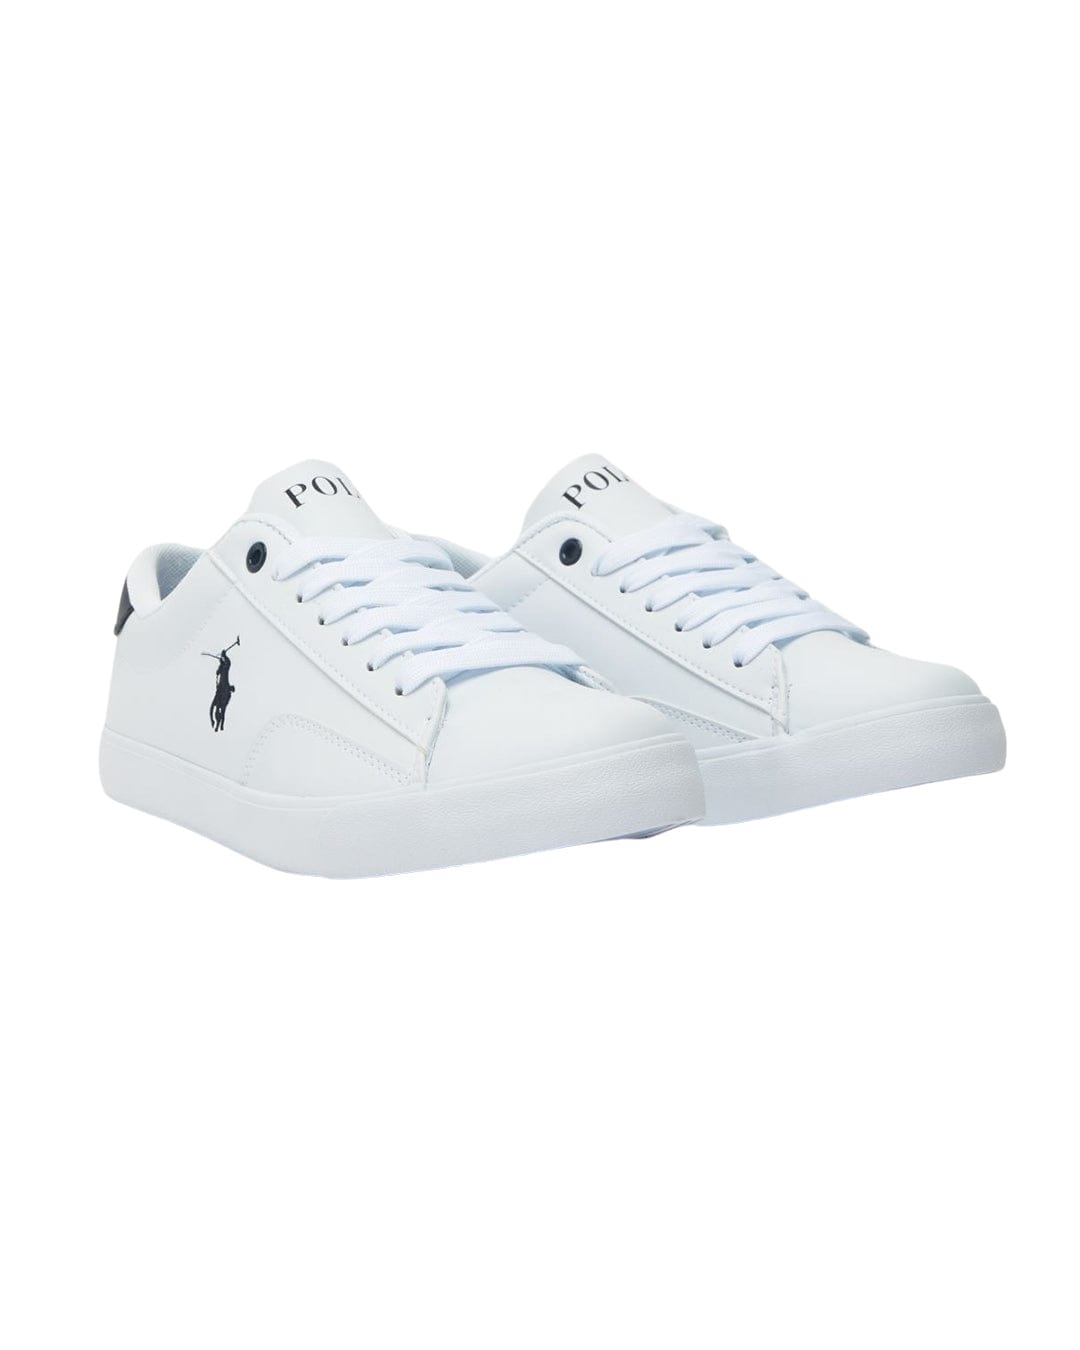 Polo Ralph Lauren Shoes Boys Polo Ralph Lauren White And Navy Theron Sneakers